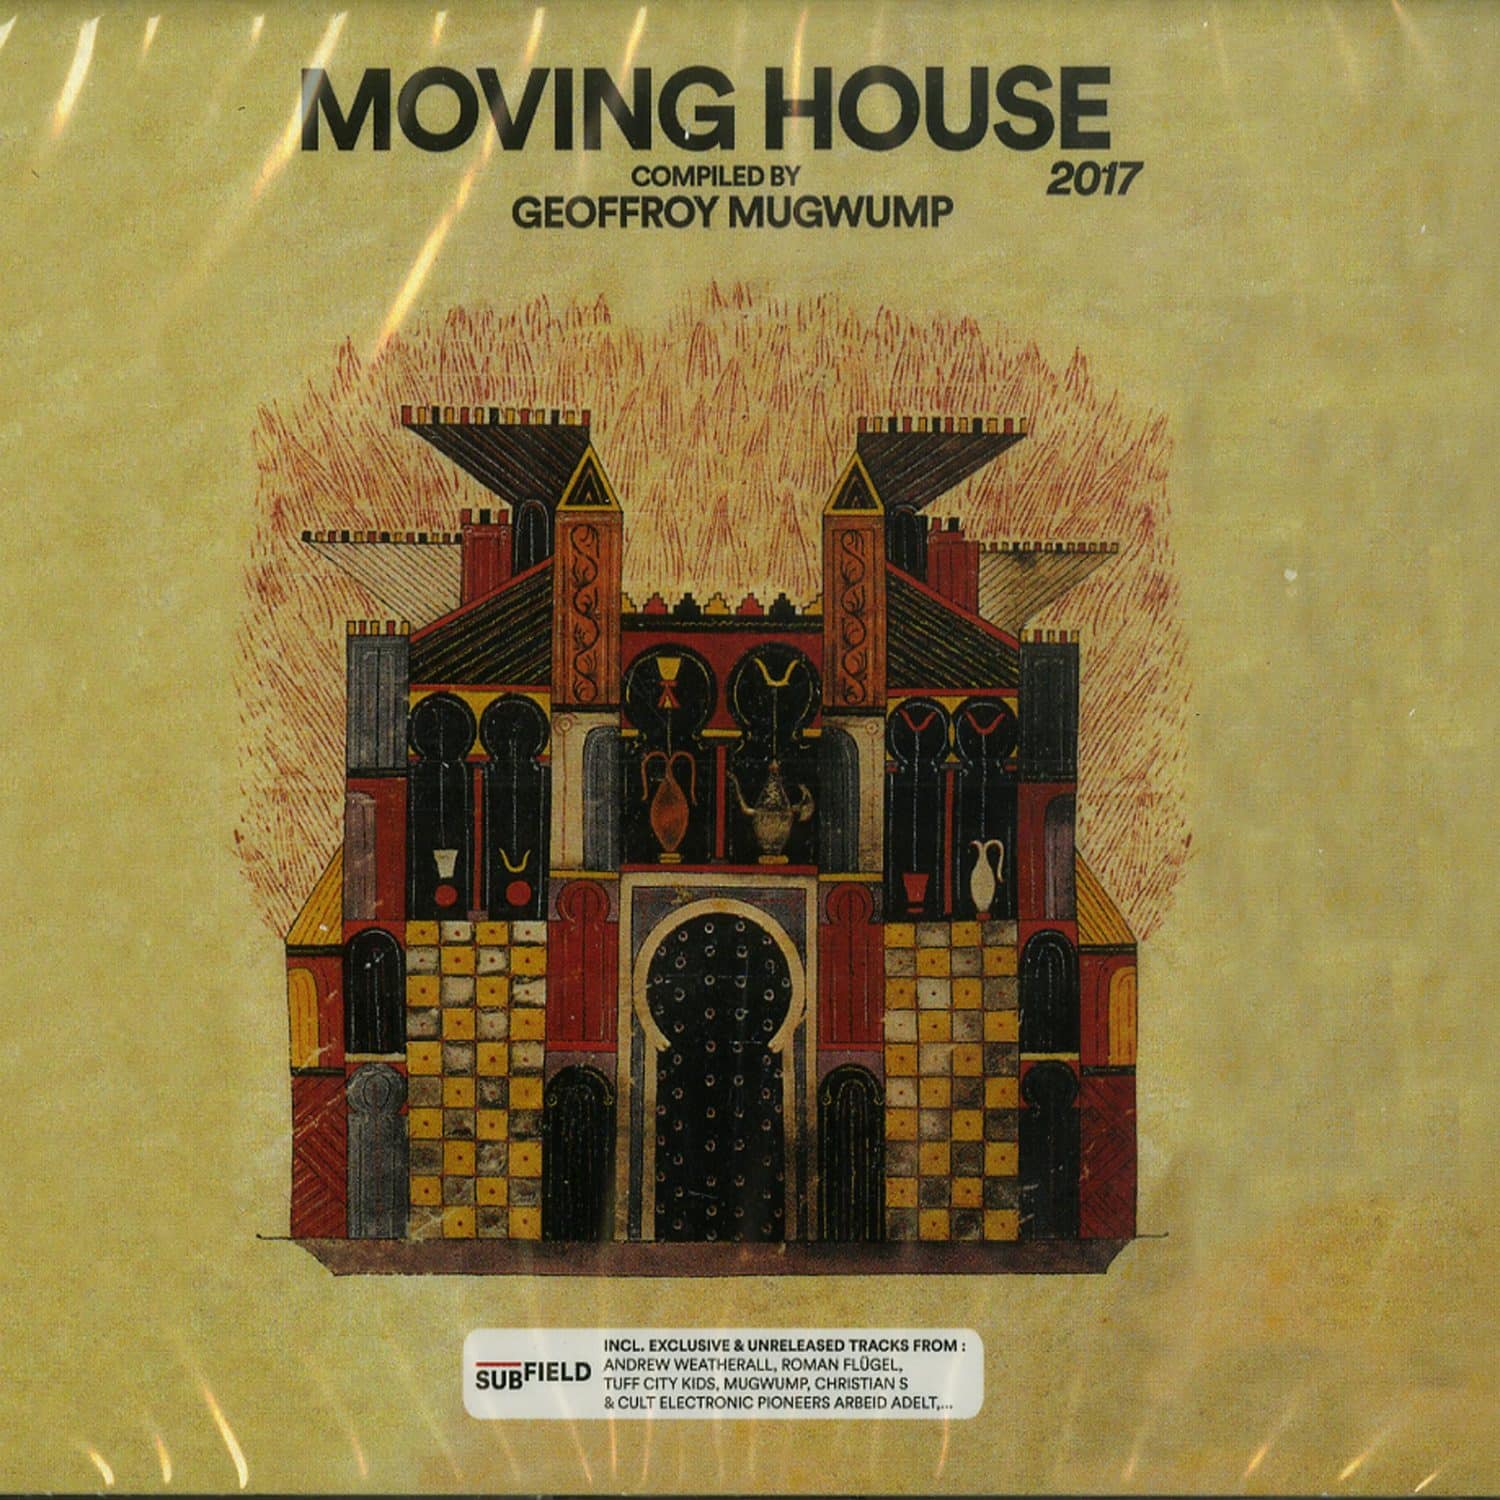 Various Artists / compiled by Geoffroy Mugwump - MOVING HOUSE 2017 